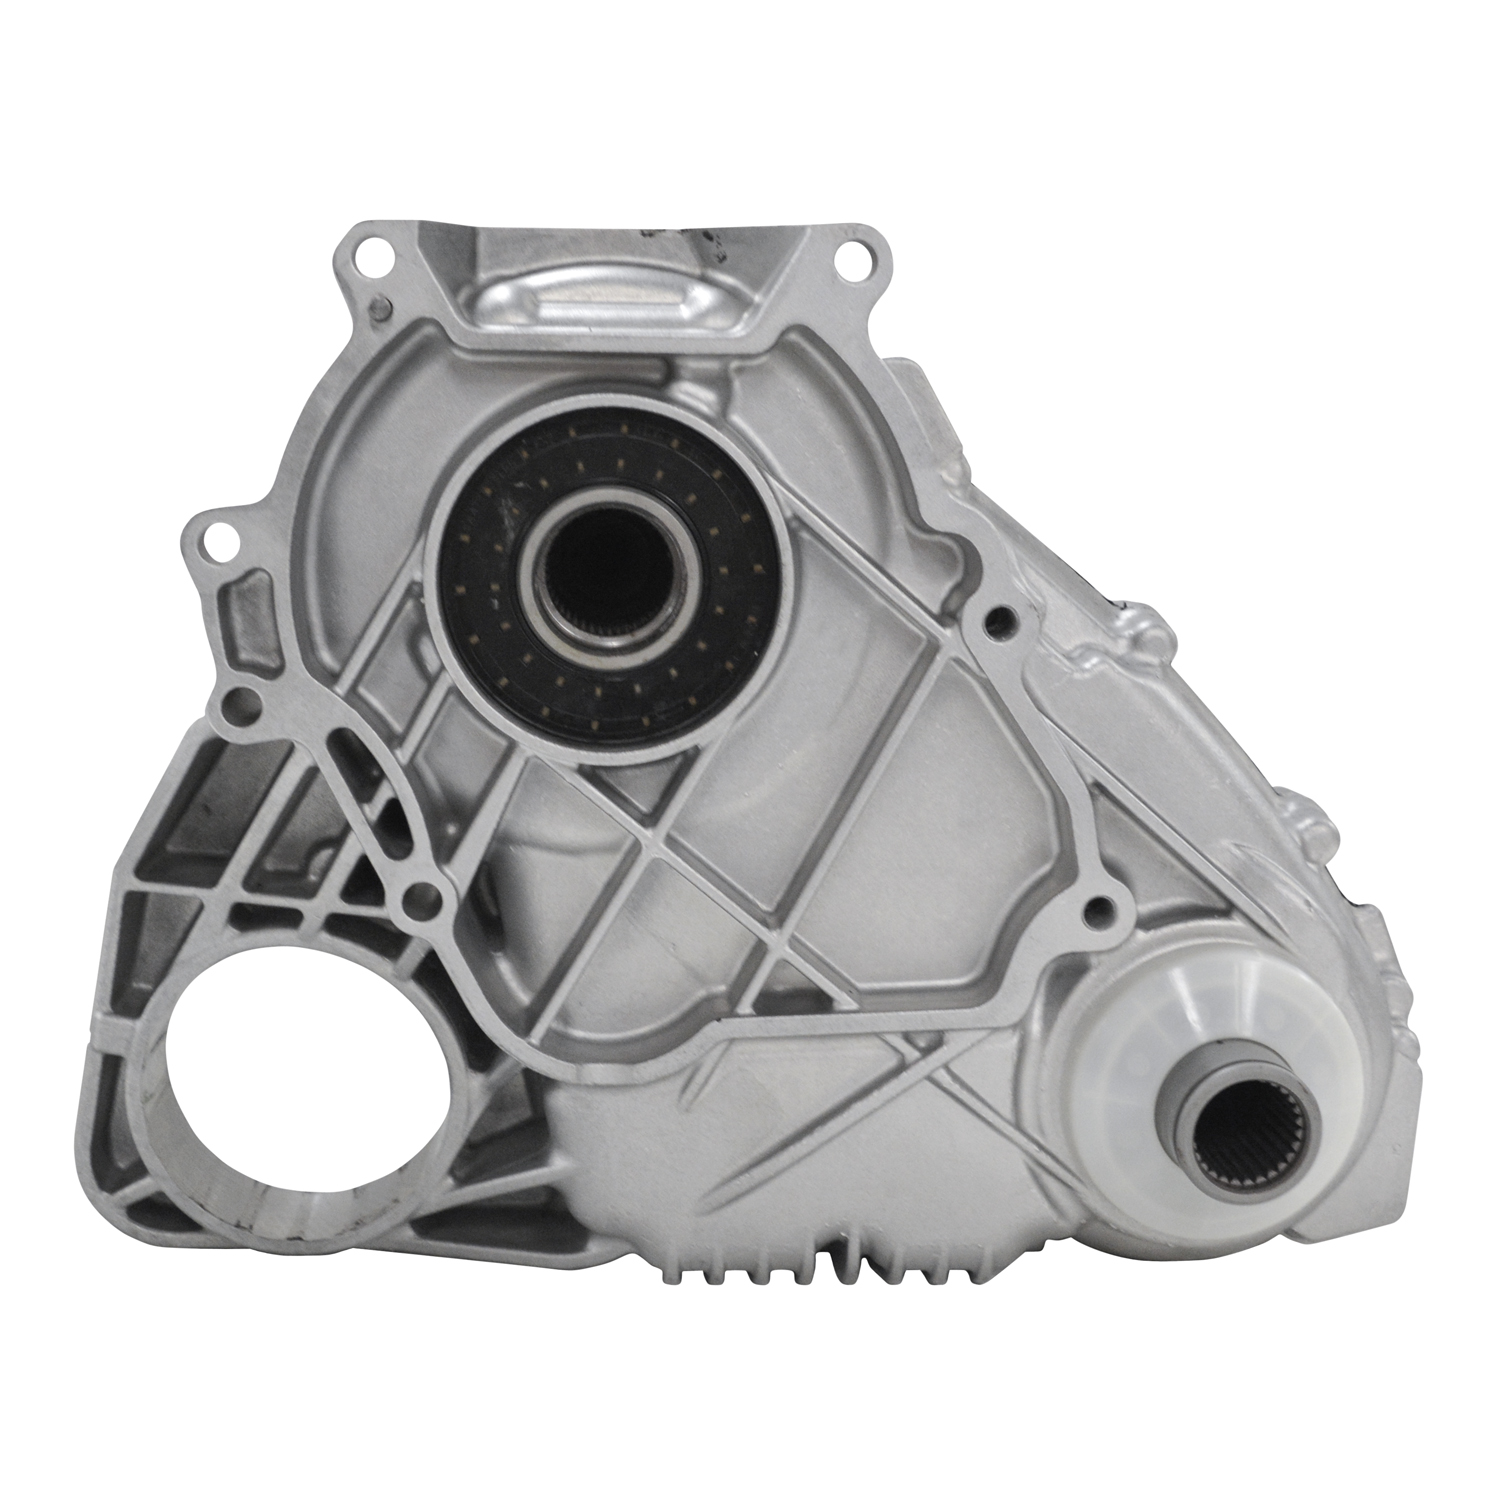 Remanufactured ATC450 Transfer Case Assembly, 2011-12 BMW X5, and X6 (2011 xDrive35i only), 3.0L Except Hybrid